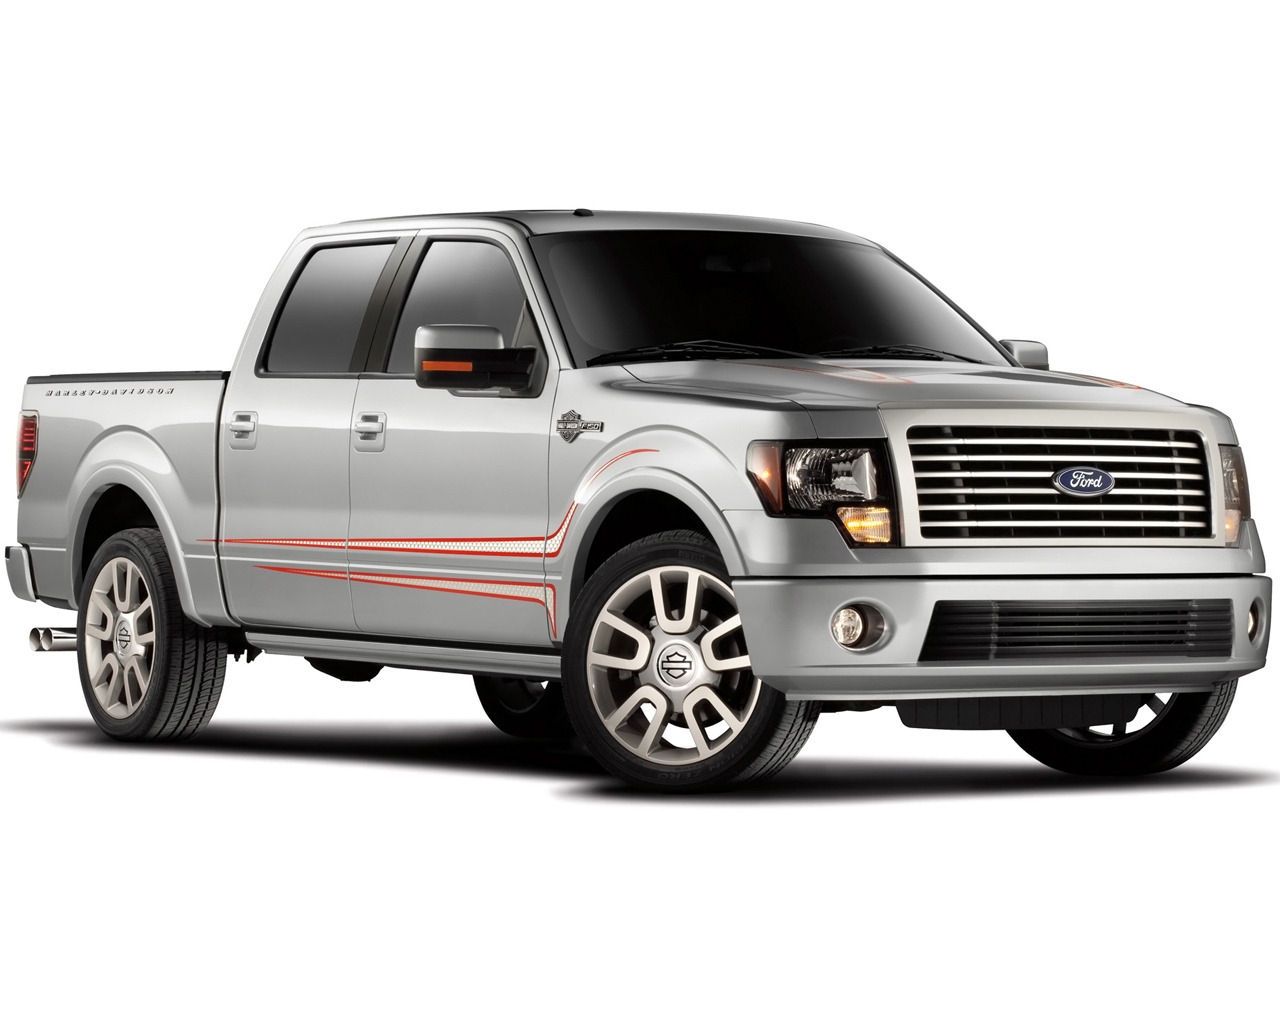 Ford Harley Davidson F 150 Side Angle for 1280 x 1024 resolution